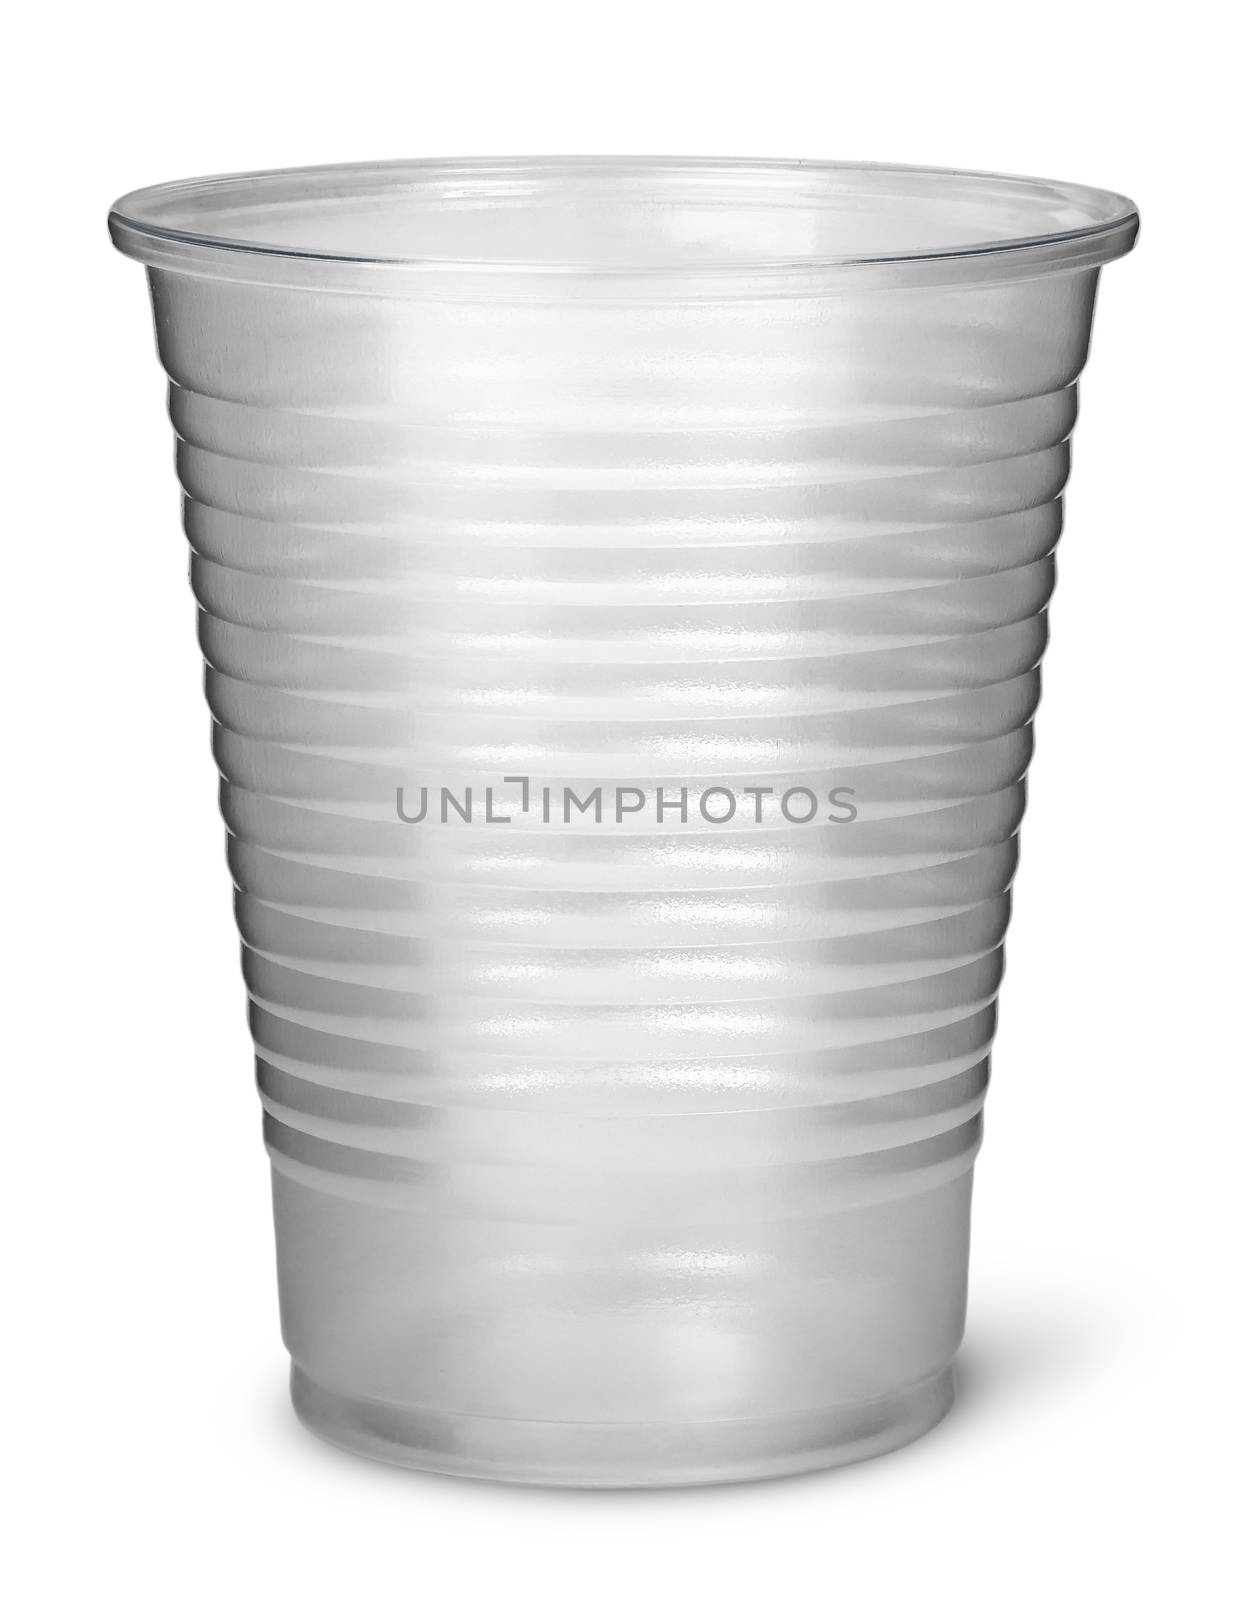 Single plastic cup vertically by Cipariss